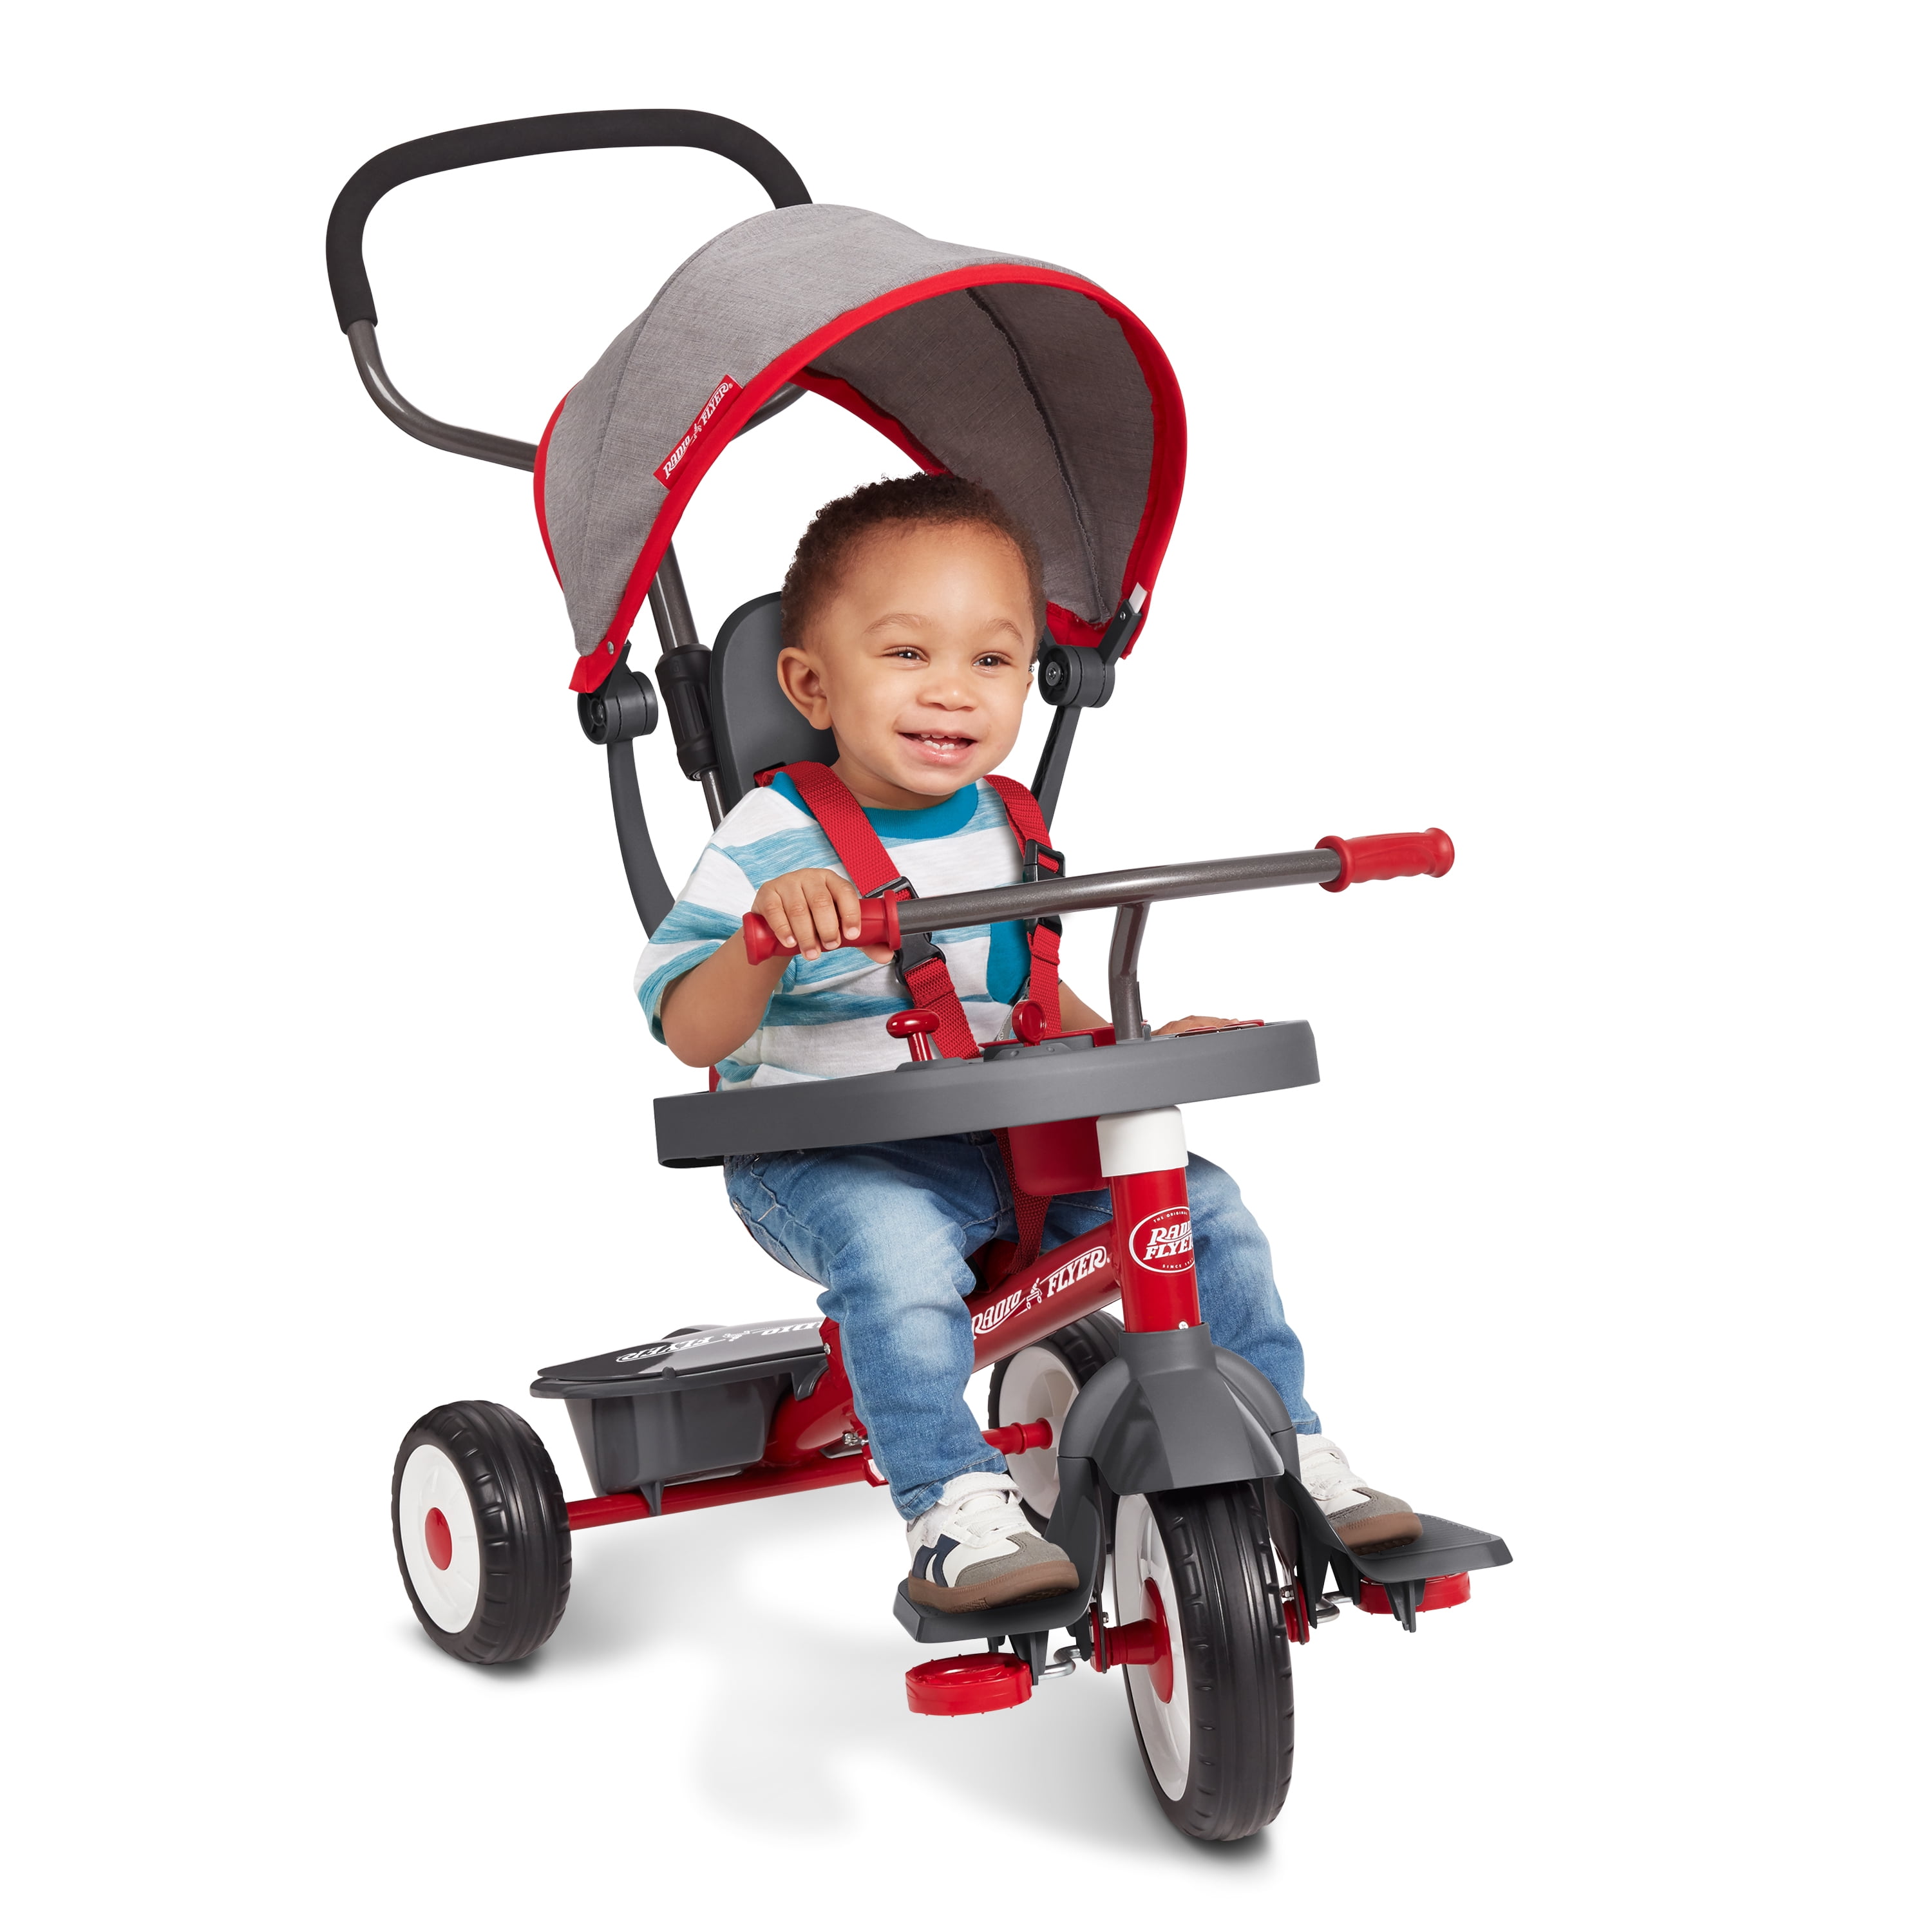 Radio Flyer, 4-in-1 Stroll 'N Trike with Activity Tray, Red & Gray, Convertible Tricycle - 2